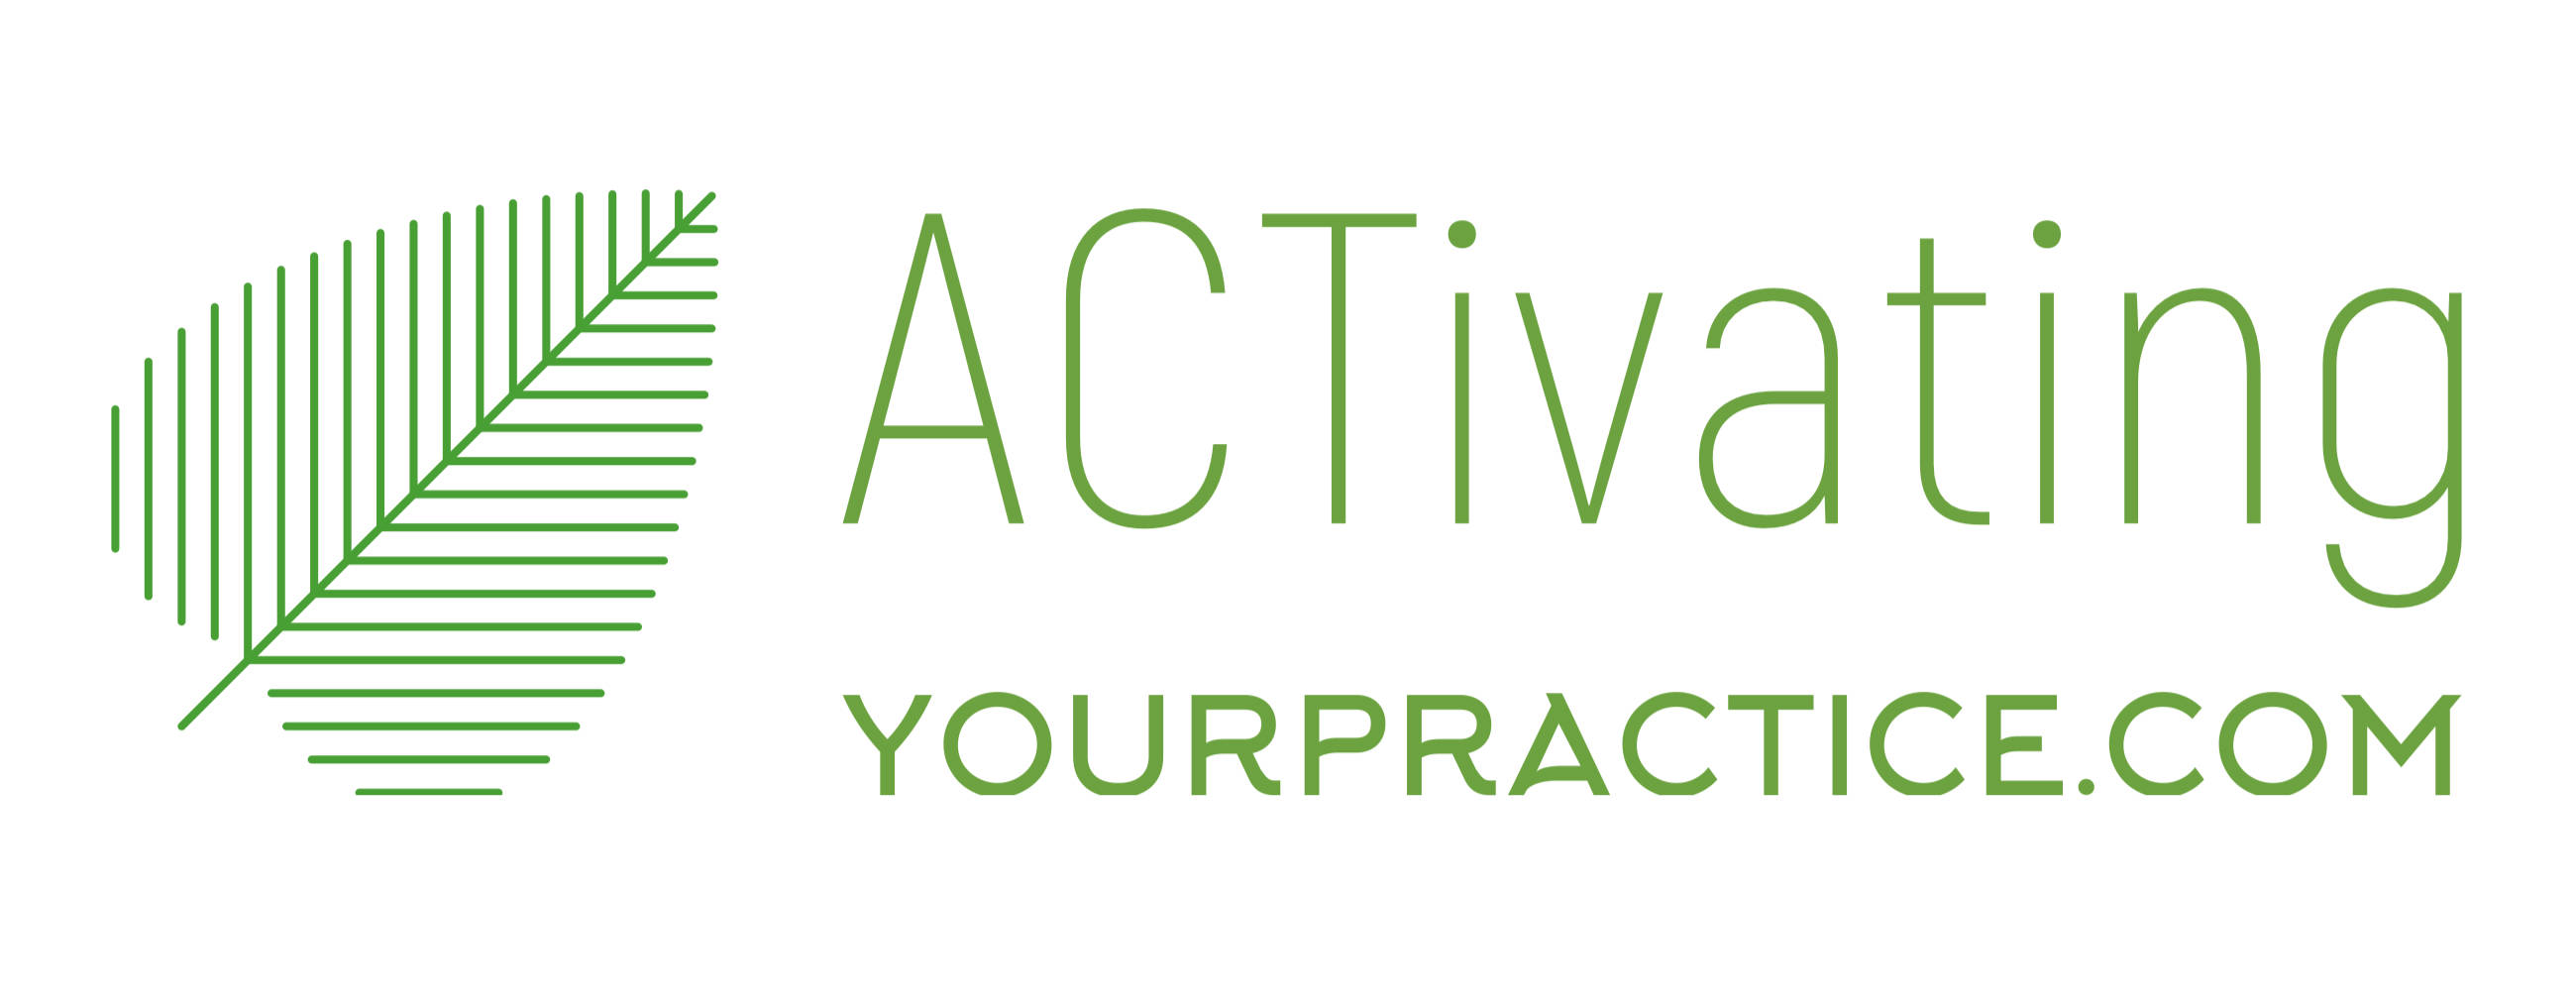 activating your practice logo and link